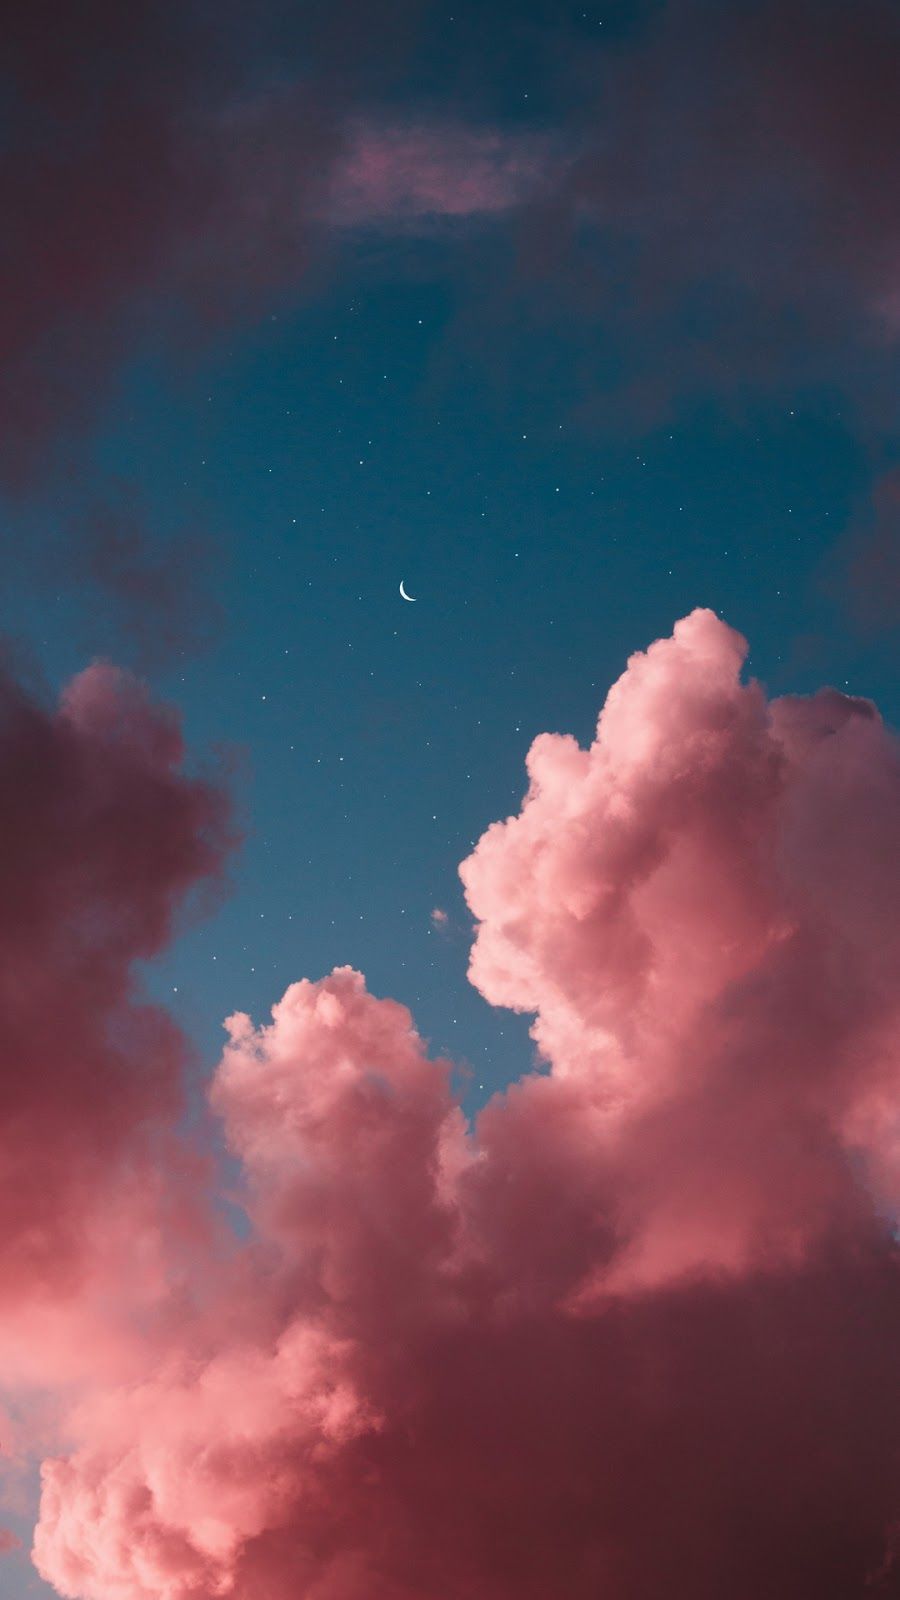 Aesthetic clouds and the moon wallpaper - Sky, night